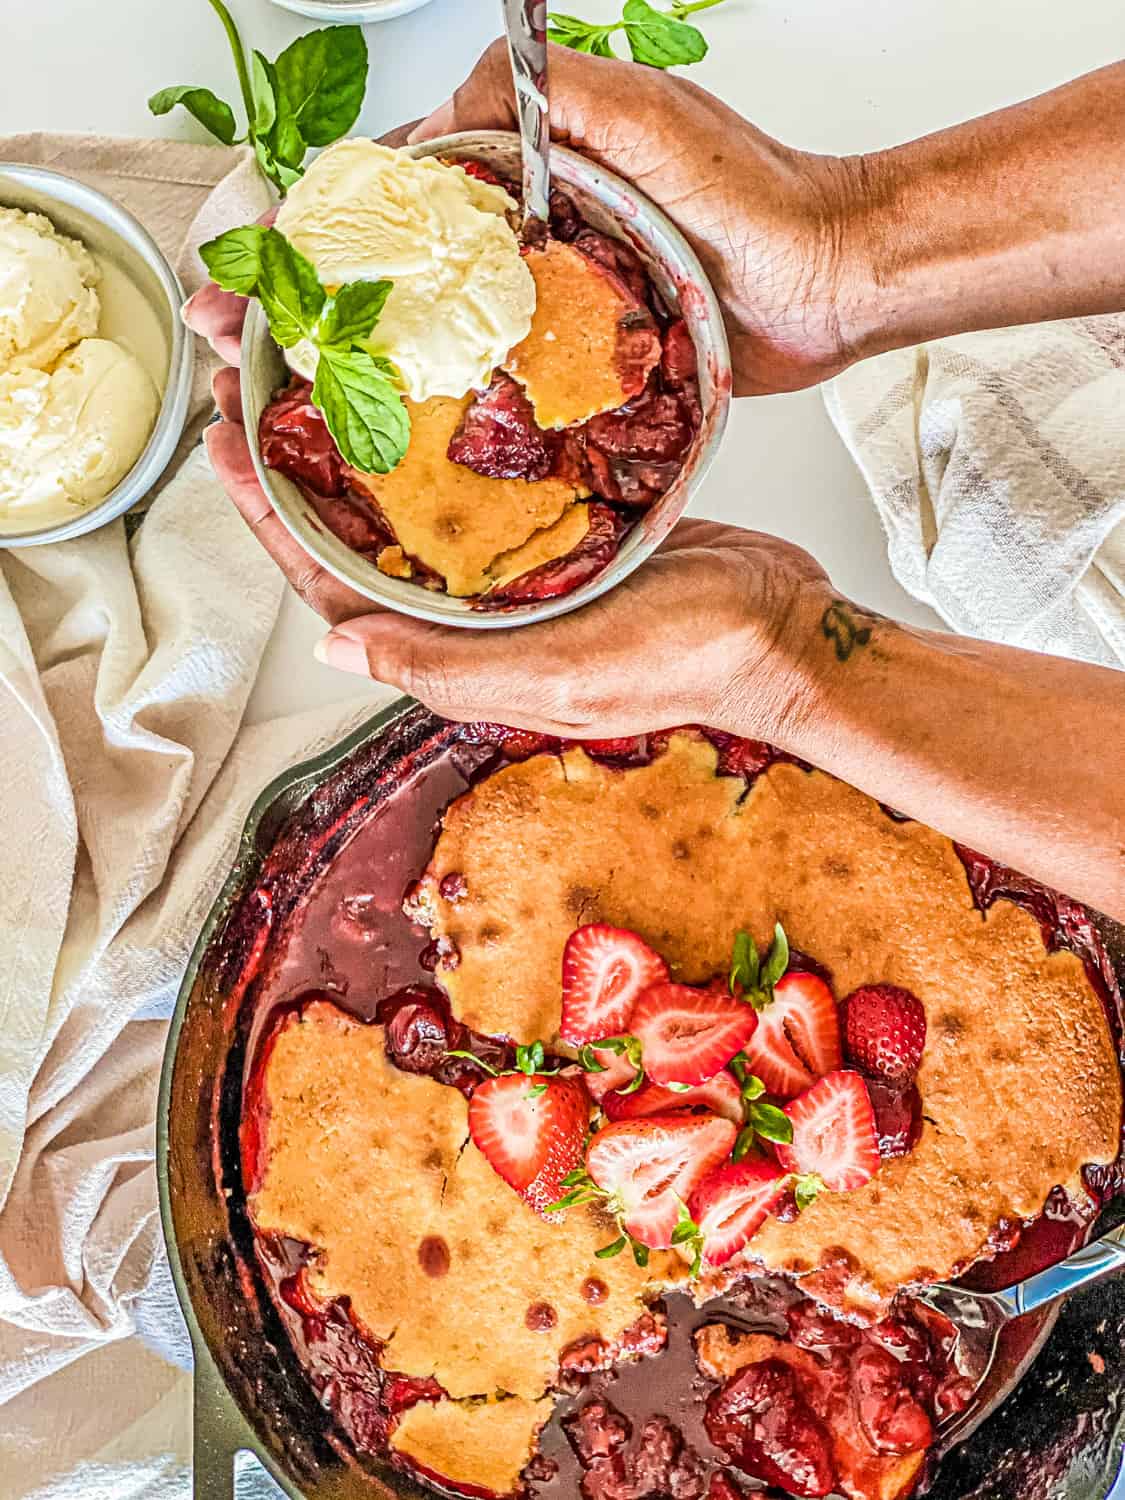 Meiko holding a bowl of Strawberry Cornbread Skillet Cobbler topped with ice cream and garnish with mint leaves.